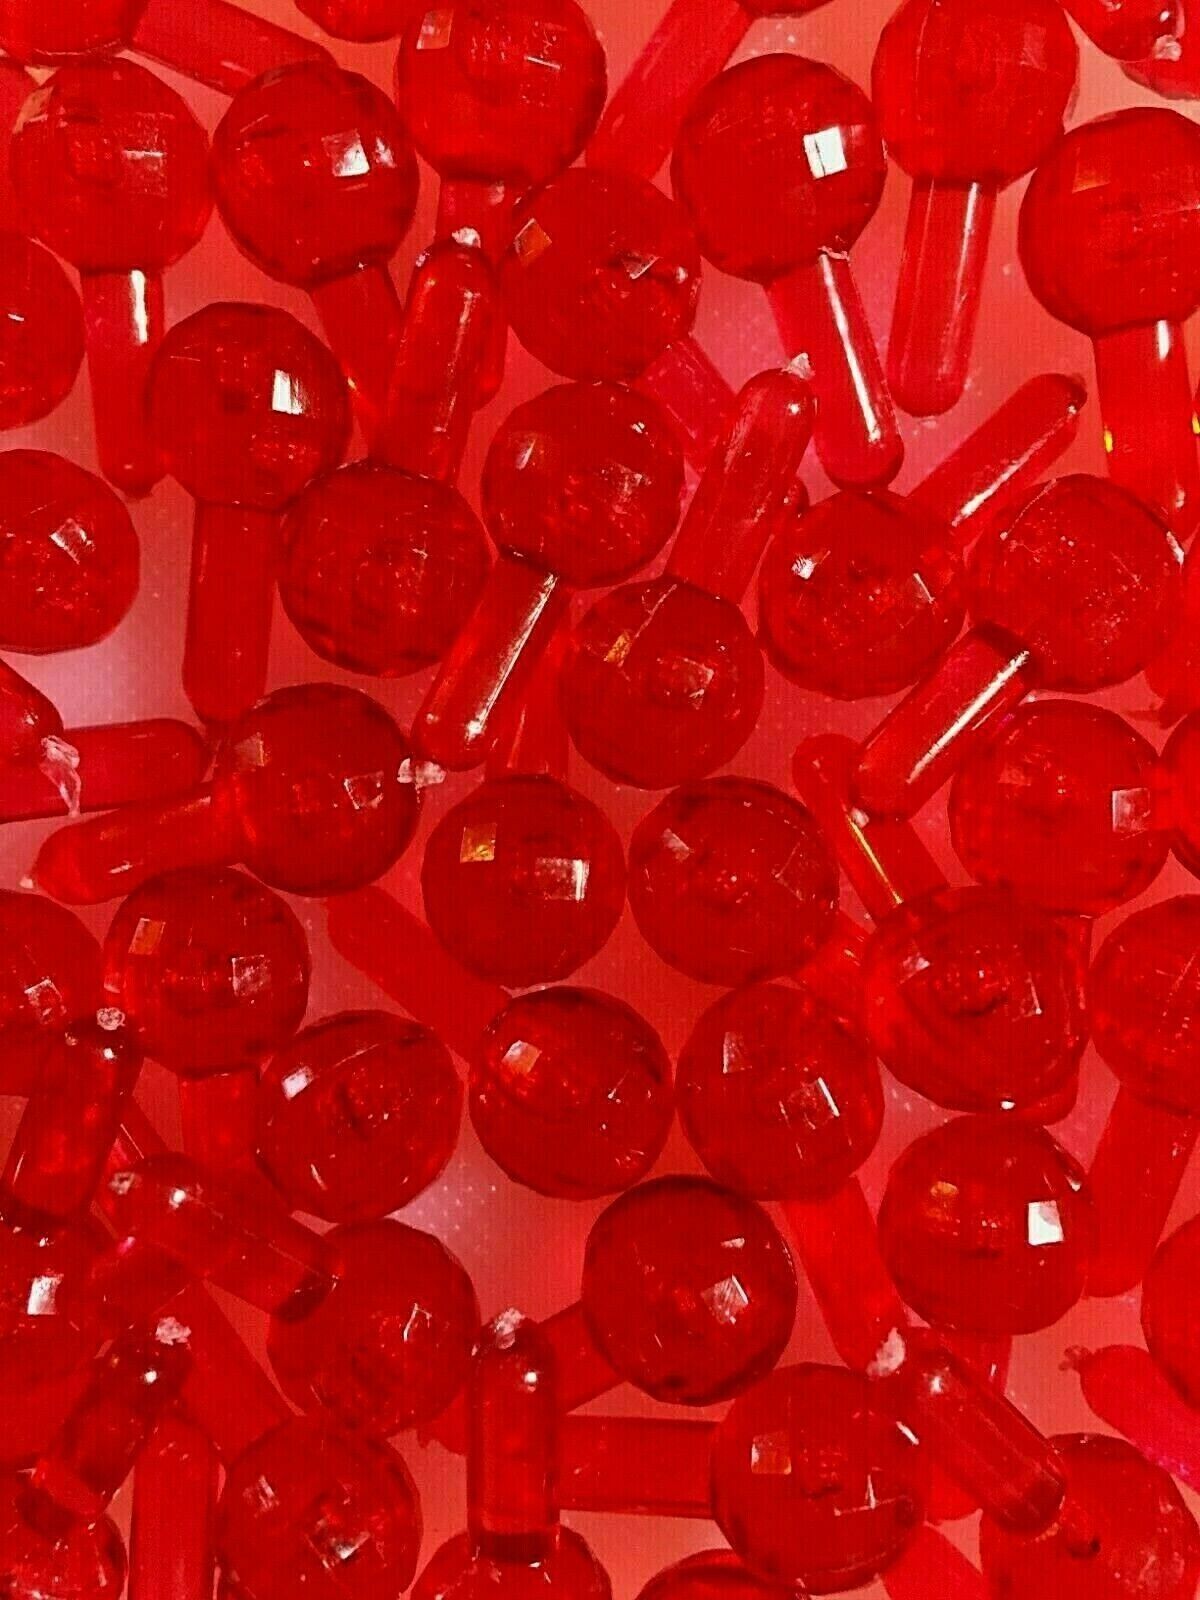 100 RED LARGE GLOBE BULBS Ceramic Christmas Tree Lights Faceted